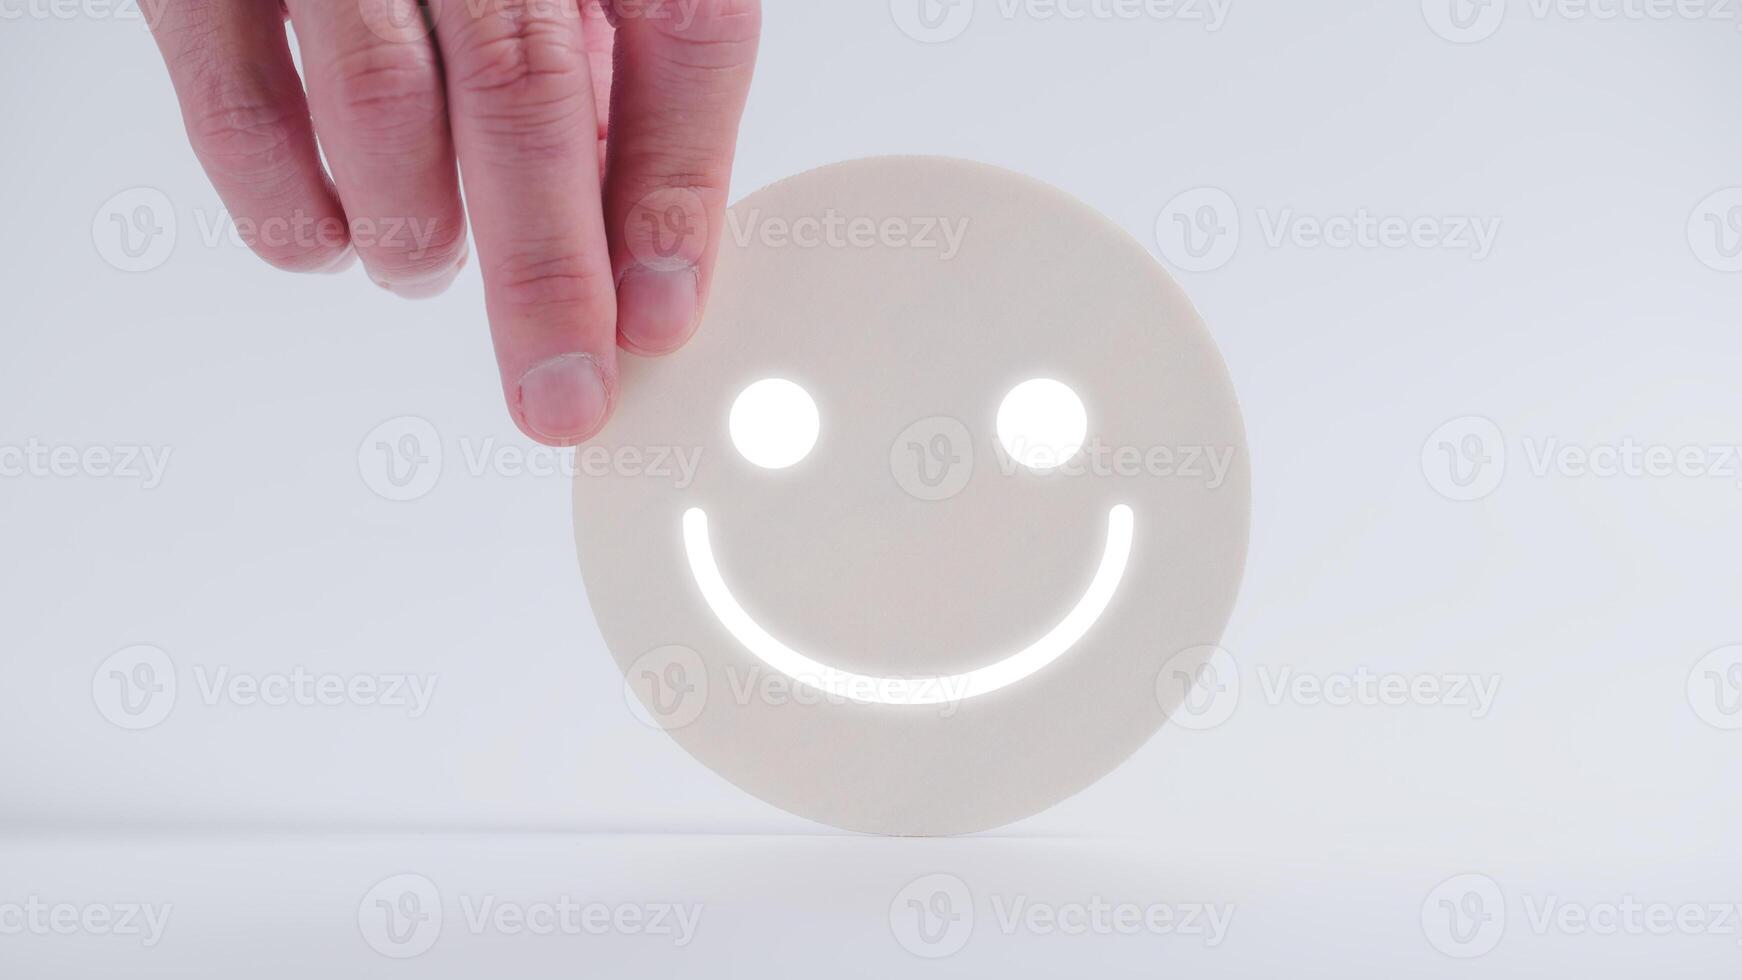 Customer service evaluation and satisfaction survey concepts. The client's hand picked the happy face smile face icon on circle wood photo